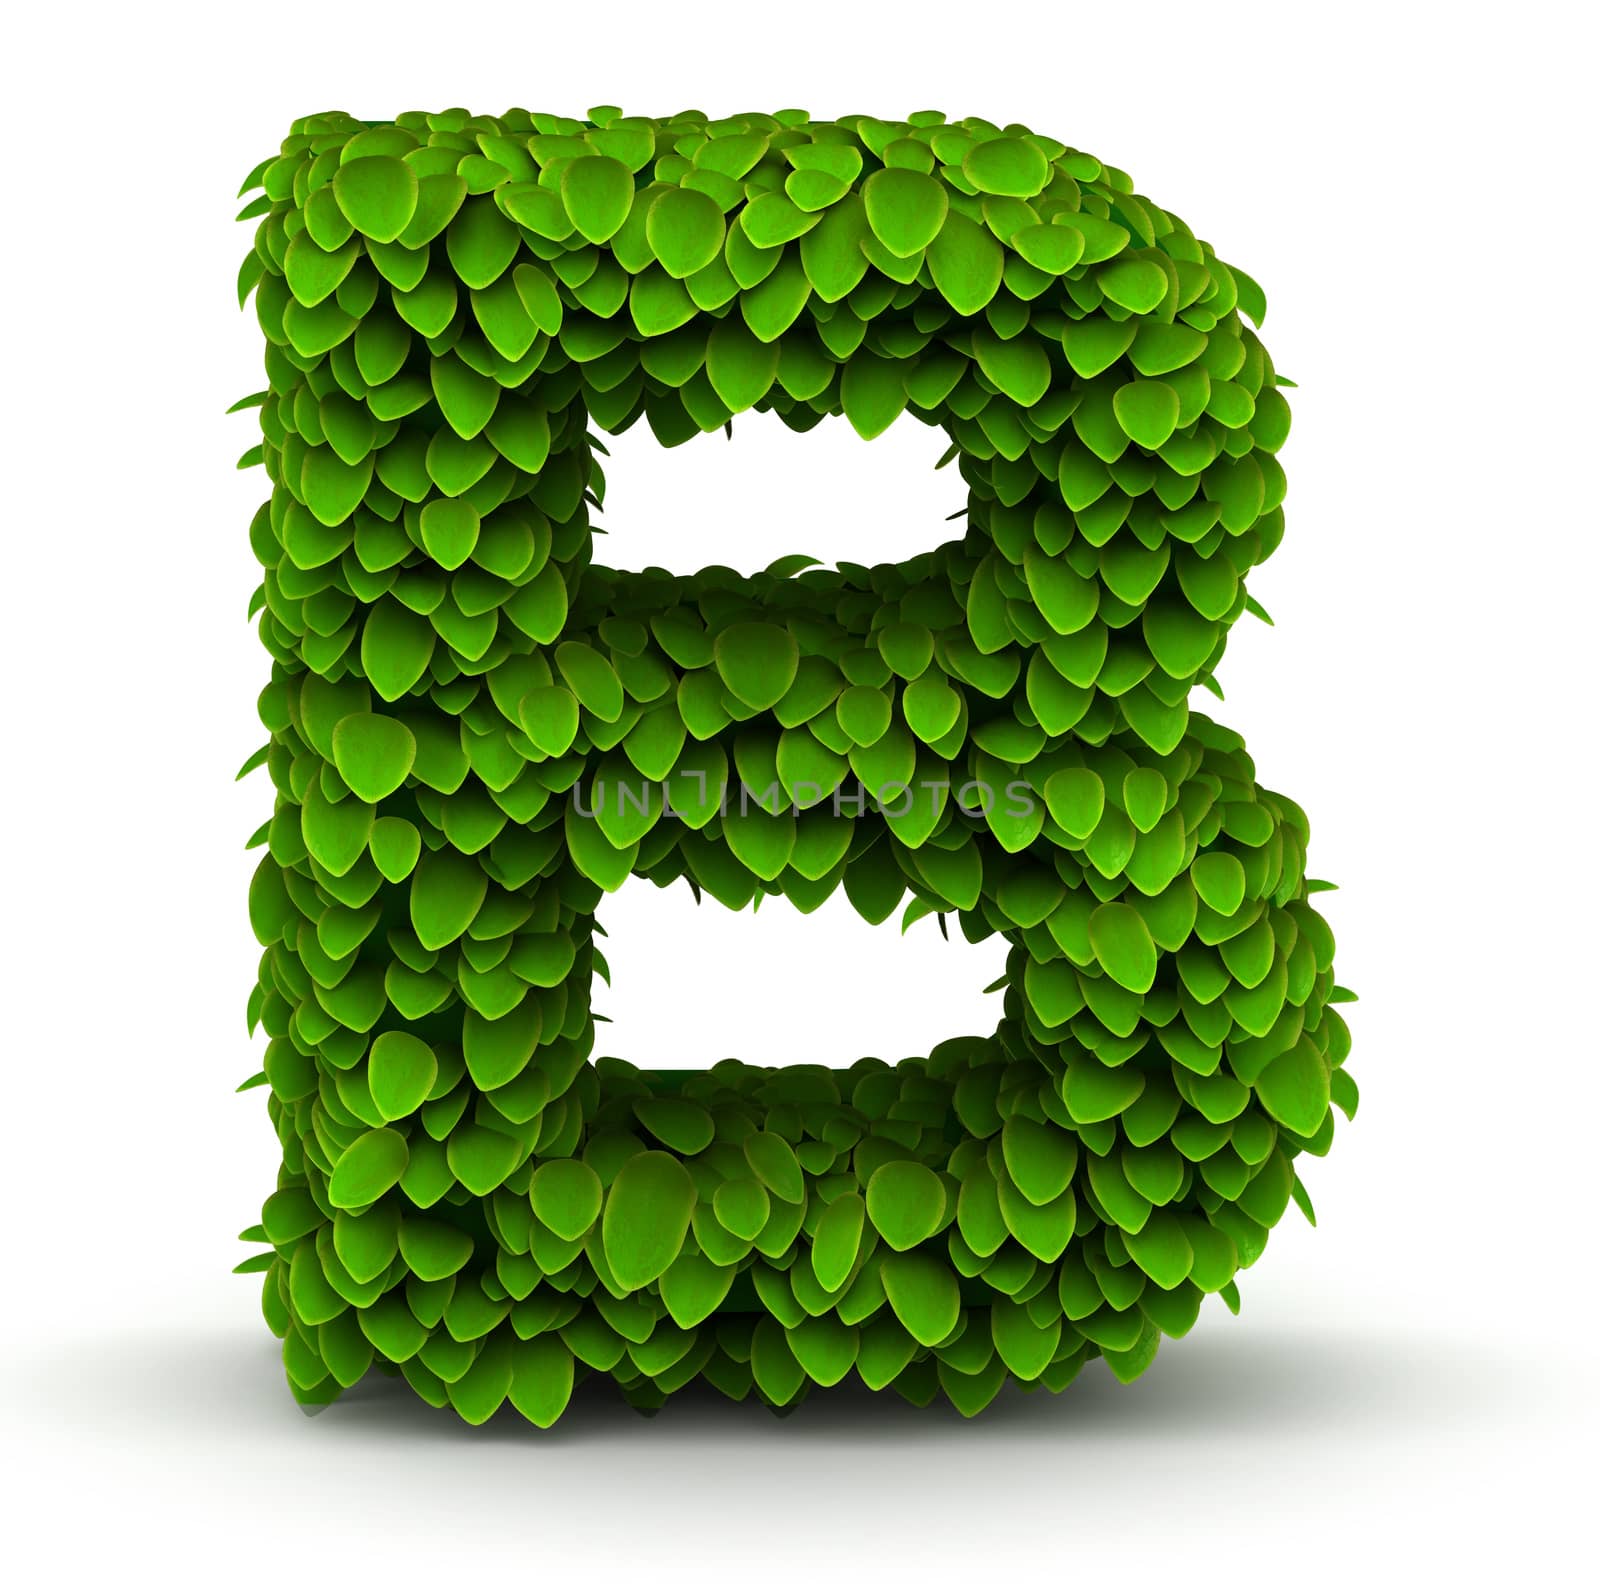 Leaves font letter B by iunewind